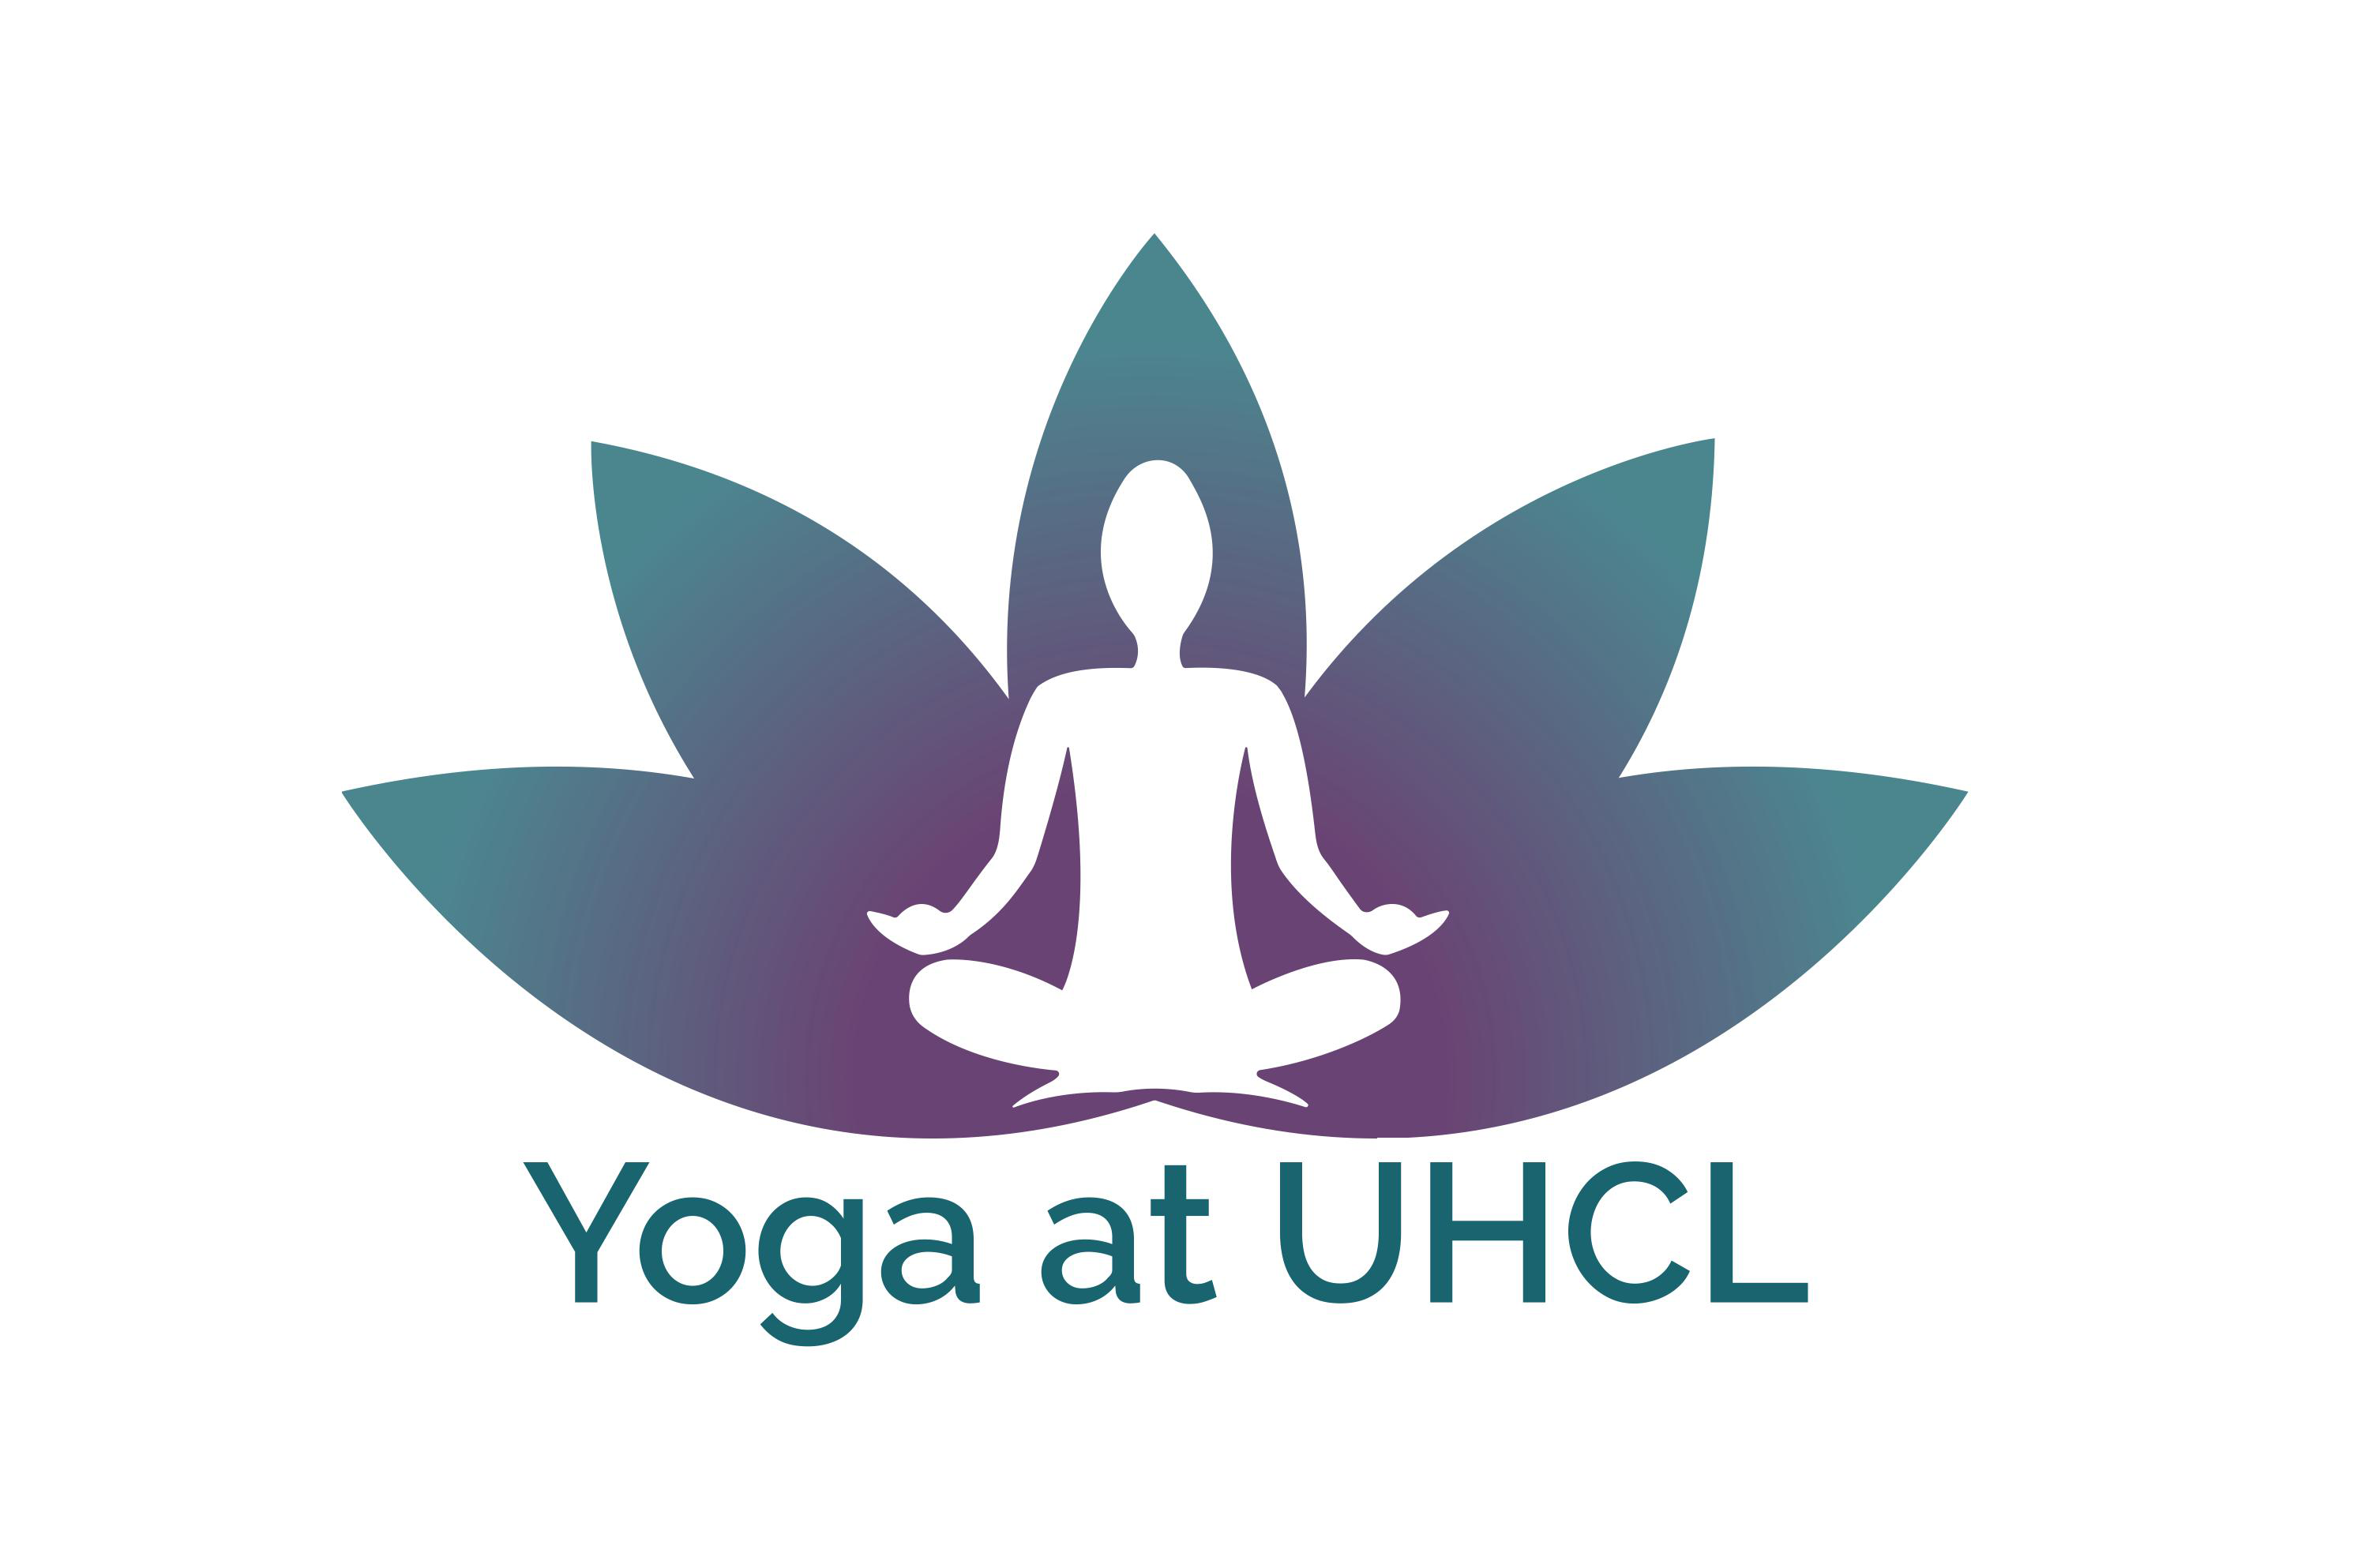 Graphic shows a silhouette of a person sitting in the lotus yoga pose in front of a lotus flower. Underneath the lotus is the words yoga at UHCL.